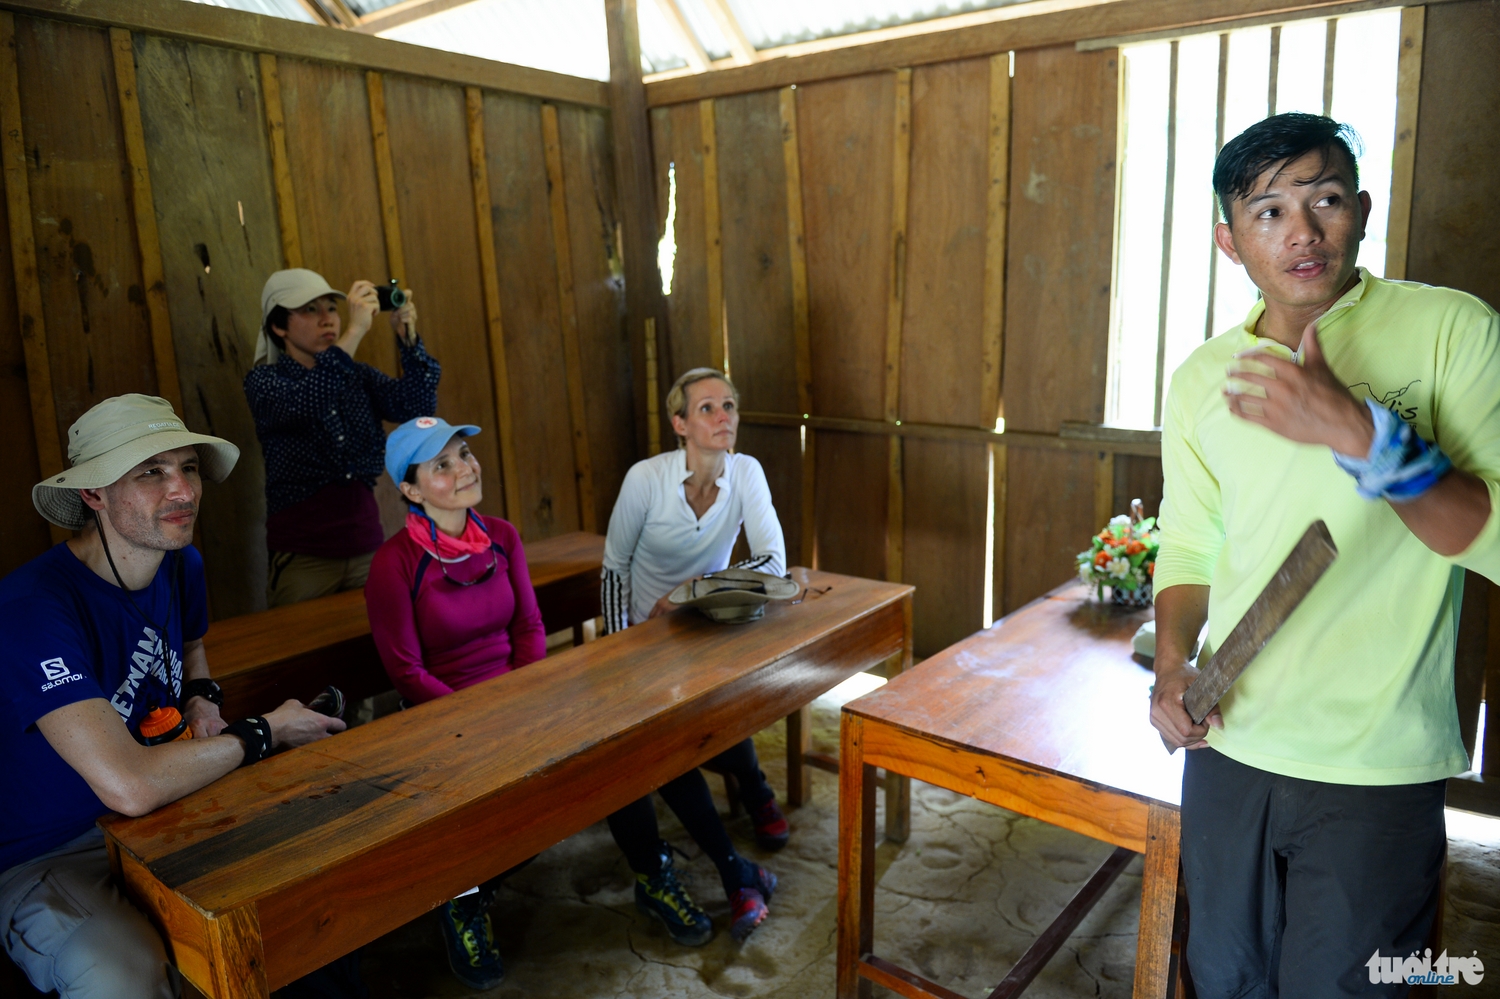 L to R: Giles Lever, Cecilia Piccioni and Camilla Mellander, Ambassadors of the UK, Italy, and Sweden, visit a class in Doong Village on the way to Son Doong.